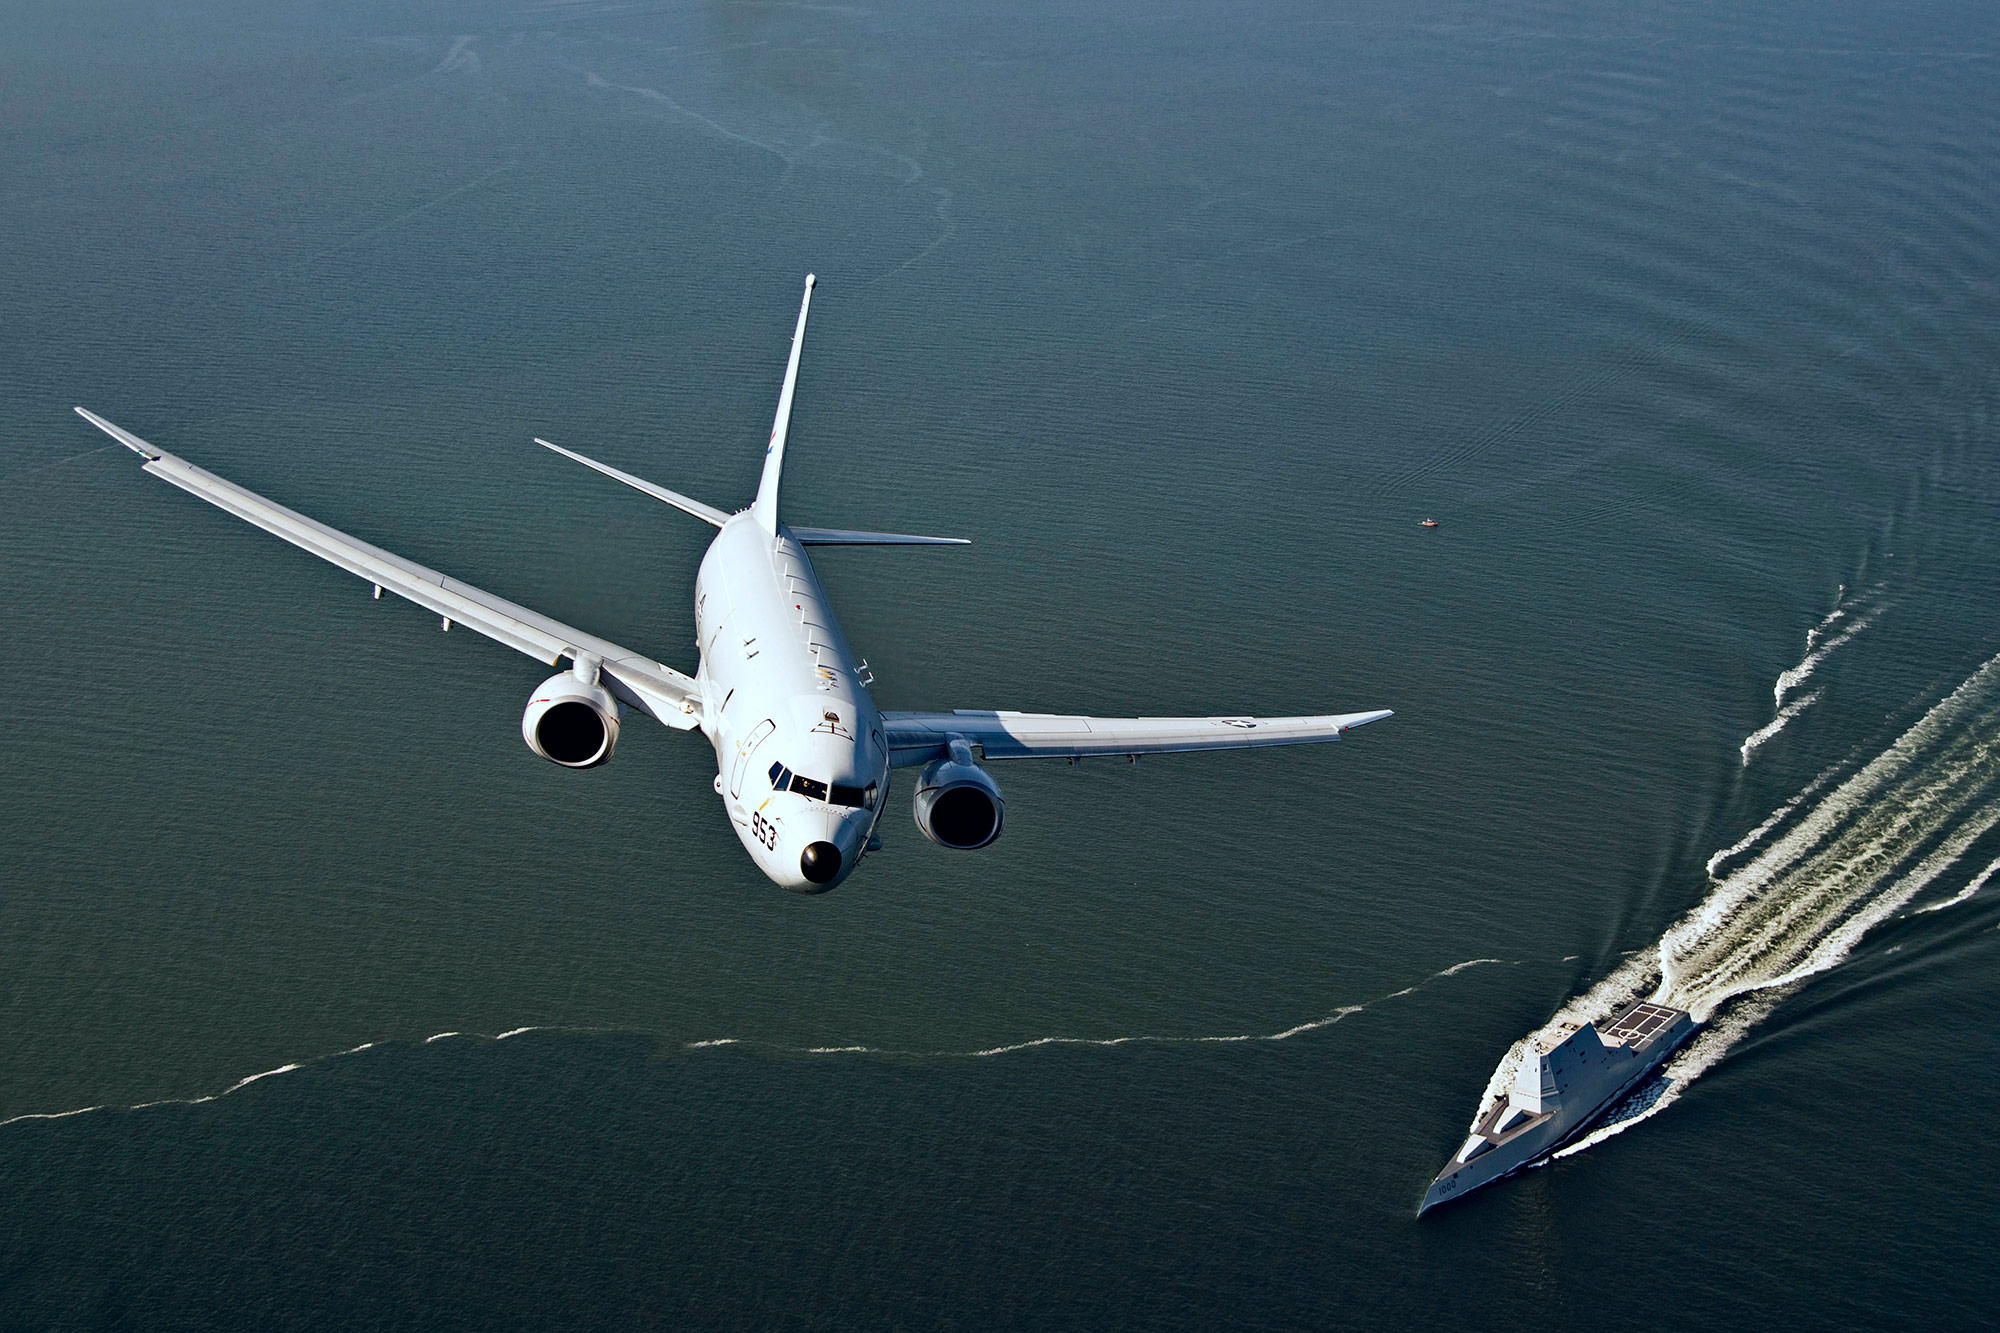 An aircraft flies over a boat in the Chesapeake Bay.